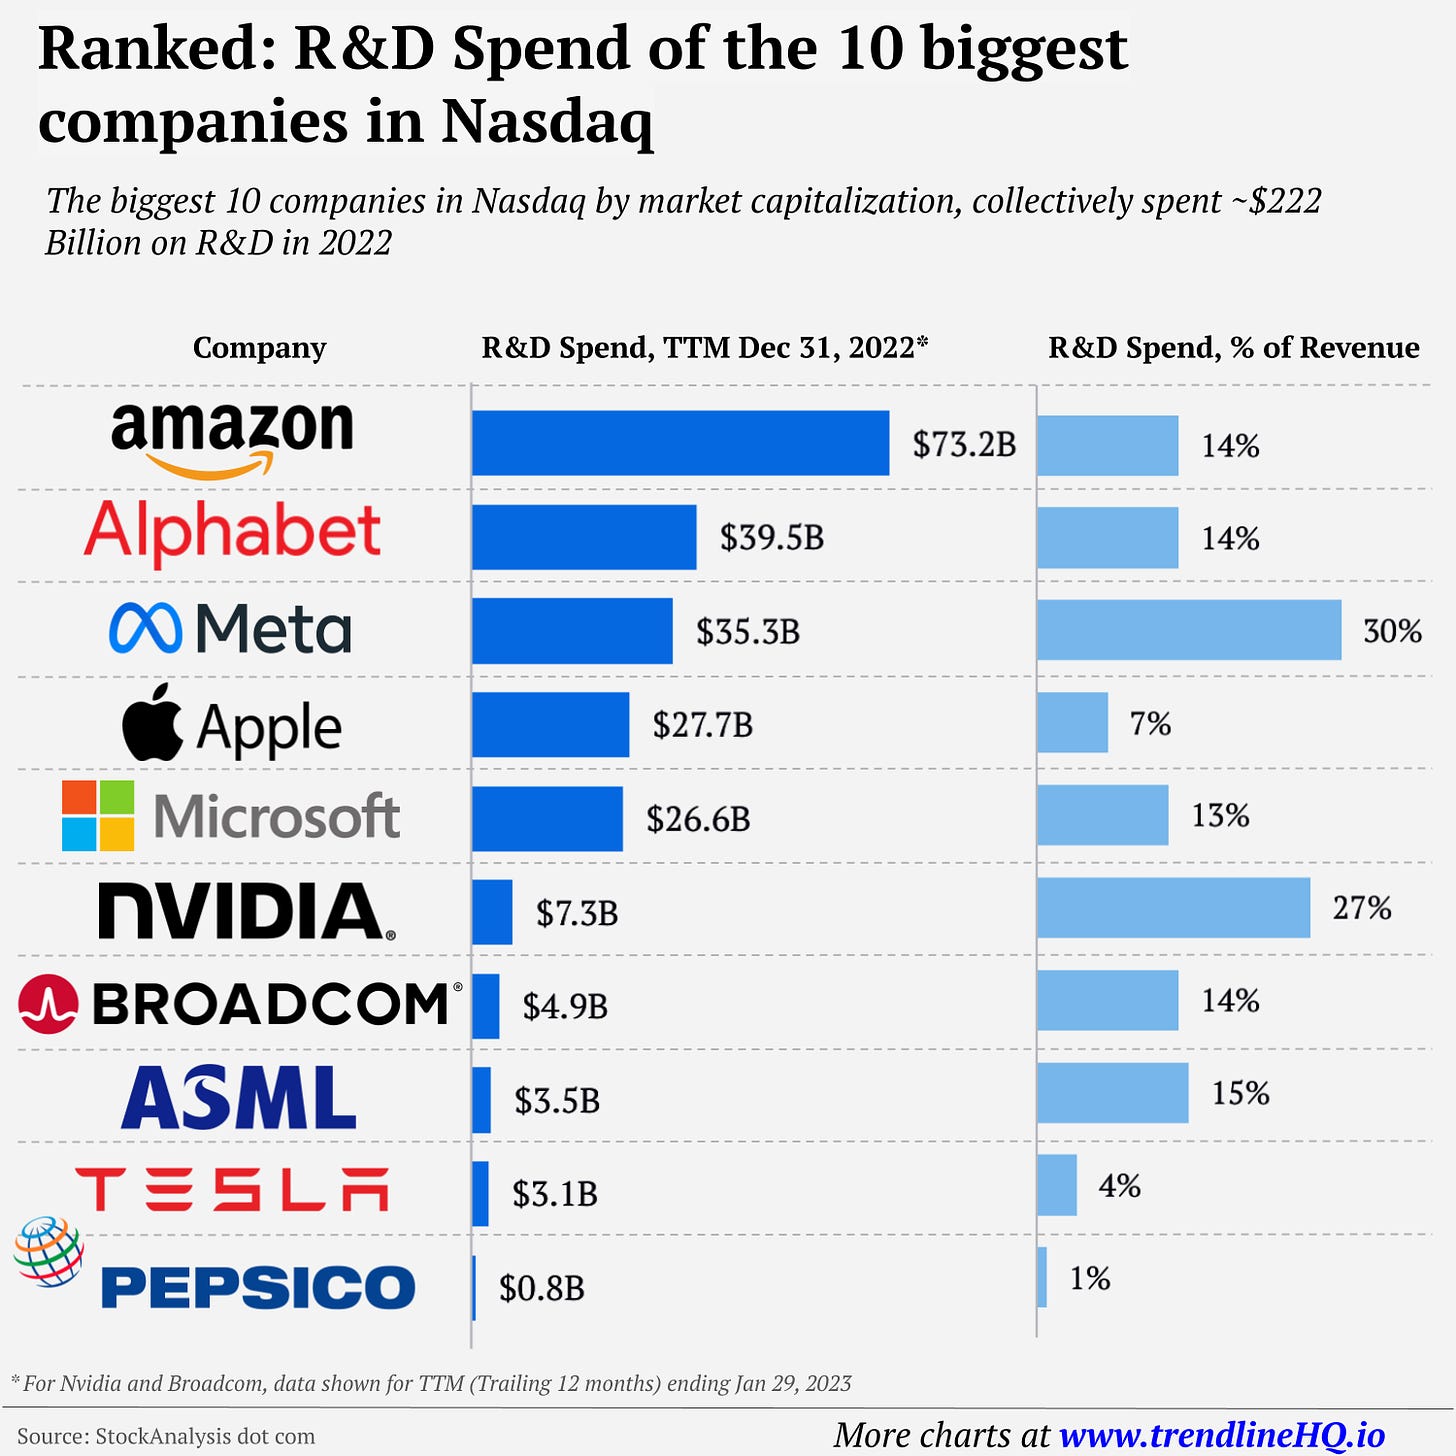 OC] Amazon spends the most on R&D : r/dataisbeautiful